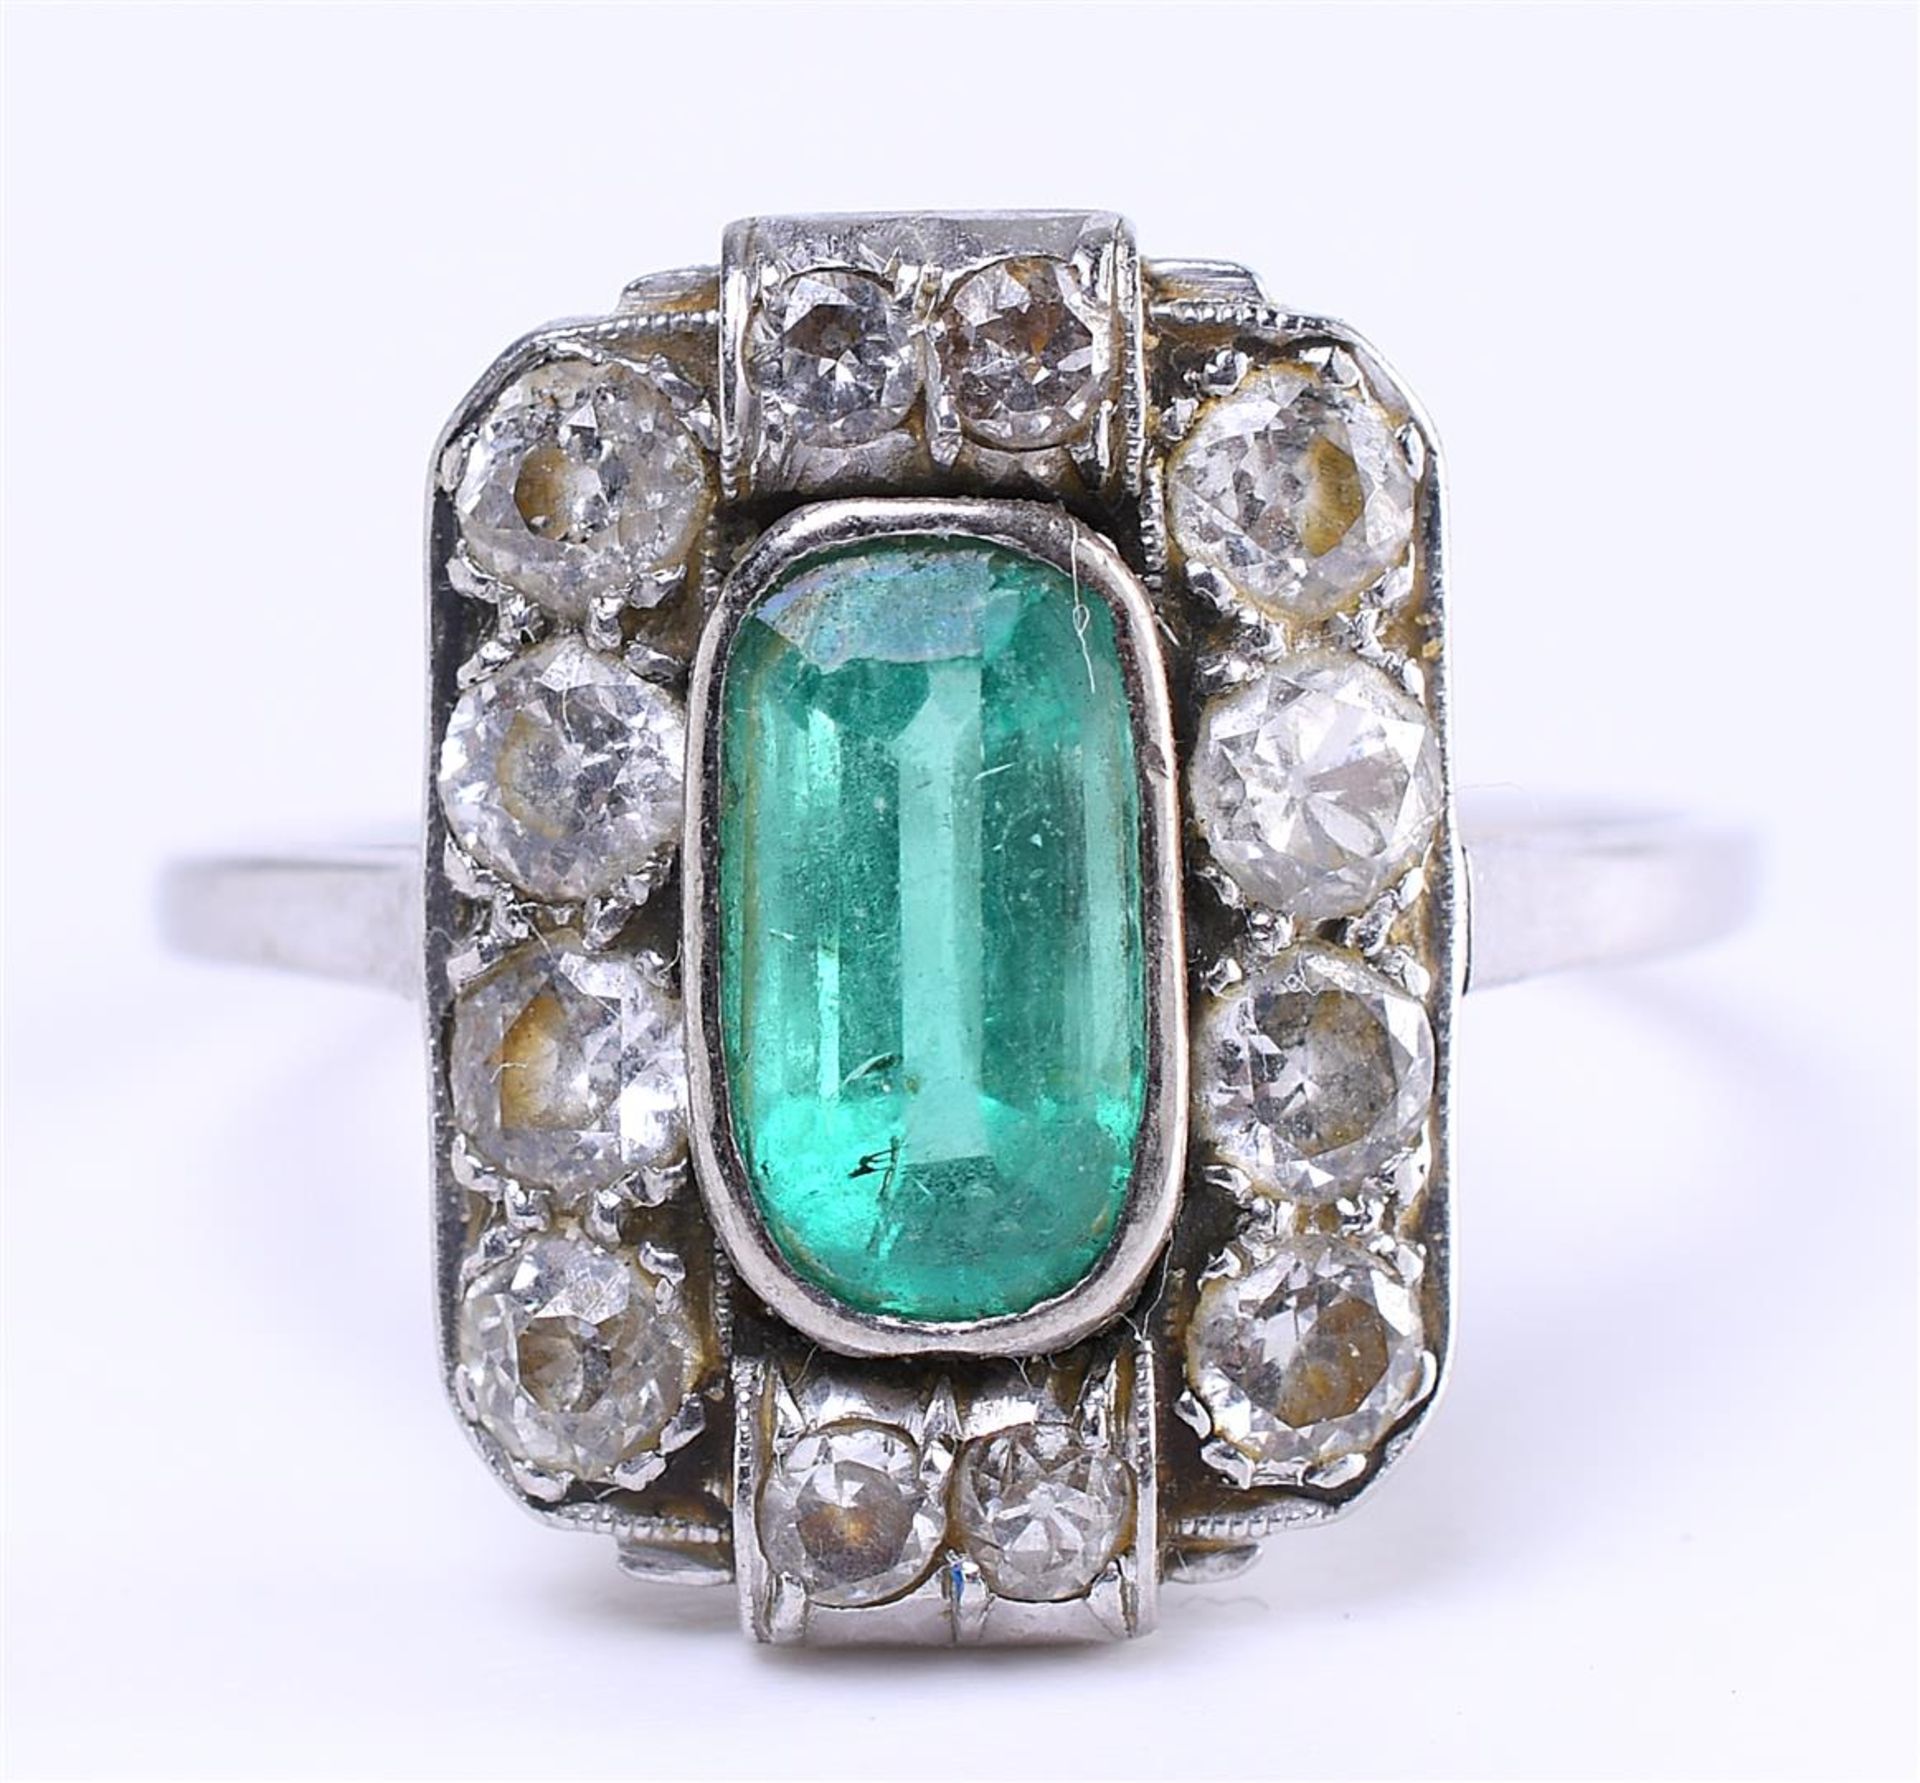 14 carat white gold (rhodium-plated) ring (1970s-80s) set with a synthetic emerald